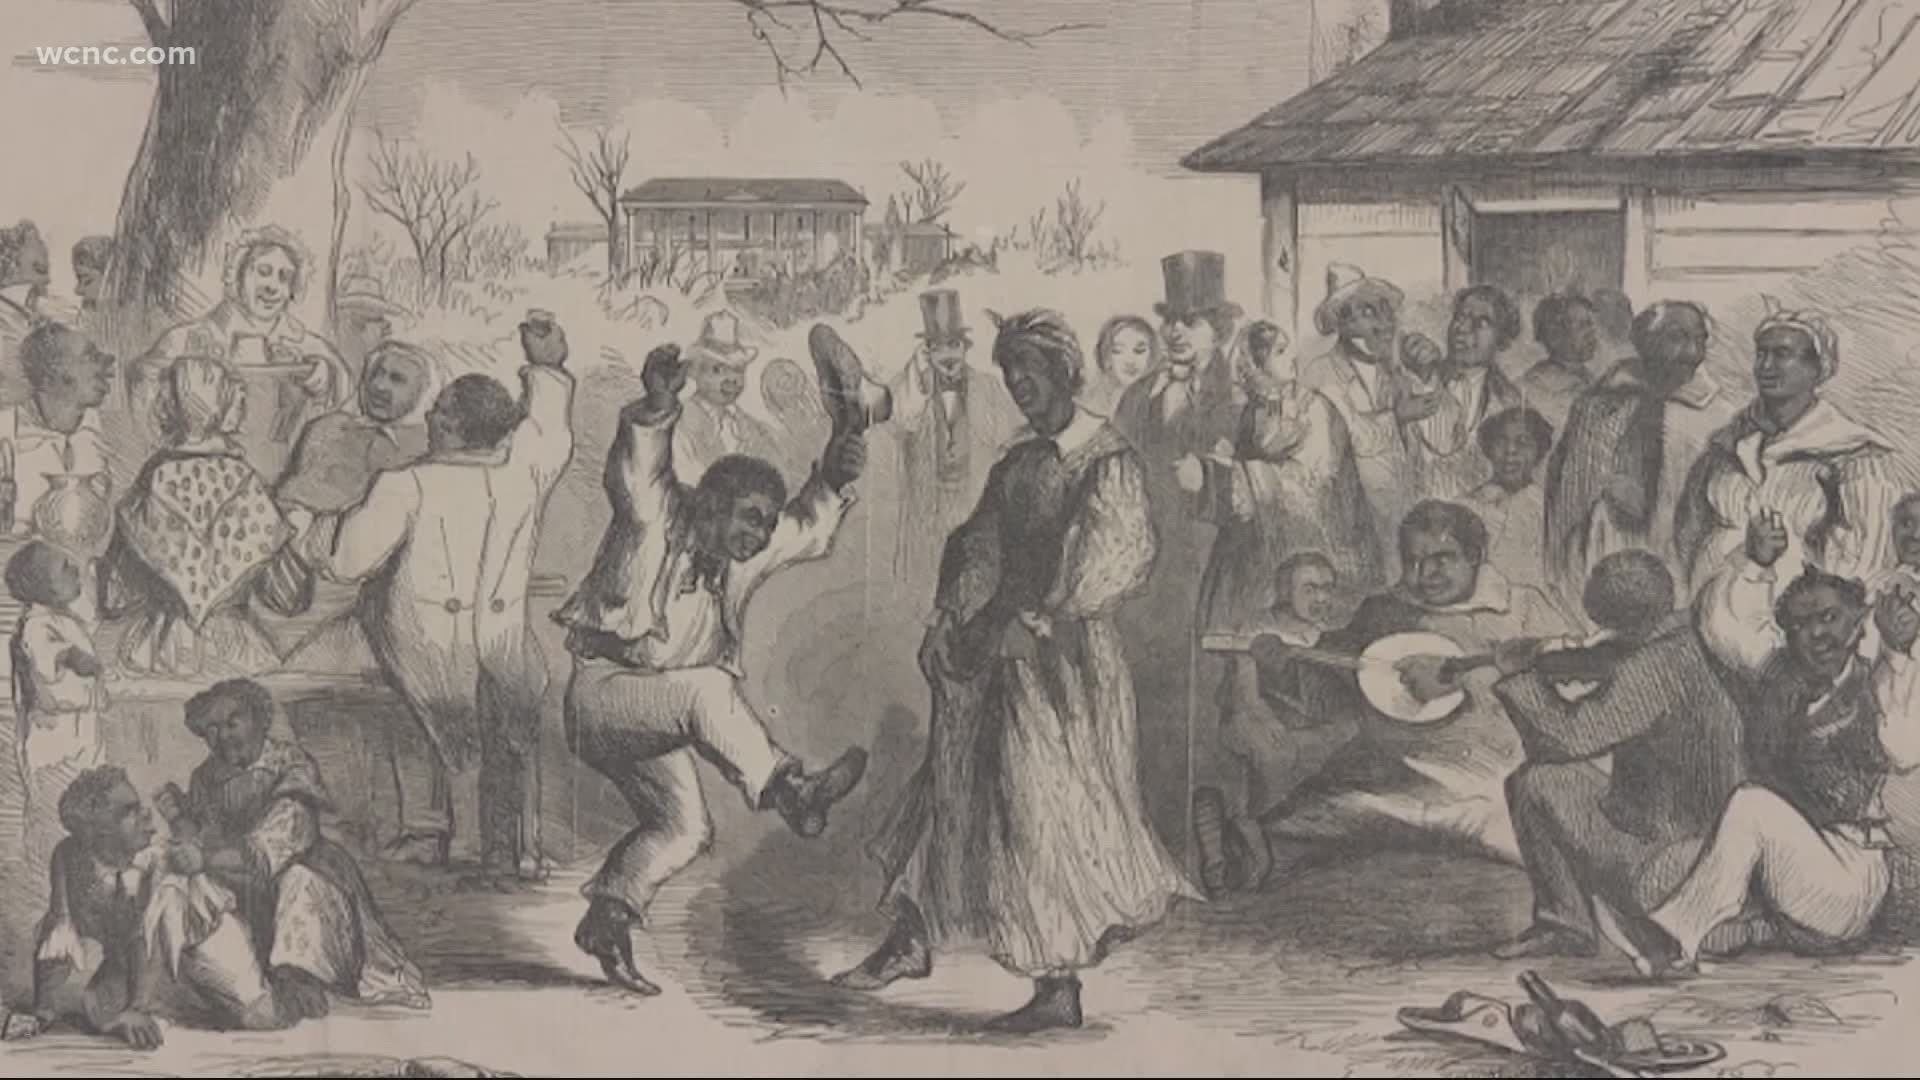 Juneteenth is one of the most important days in the Black community. But it also represents how freedom and justice have been delayed for people of color in America.